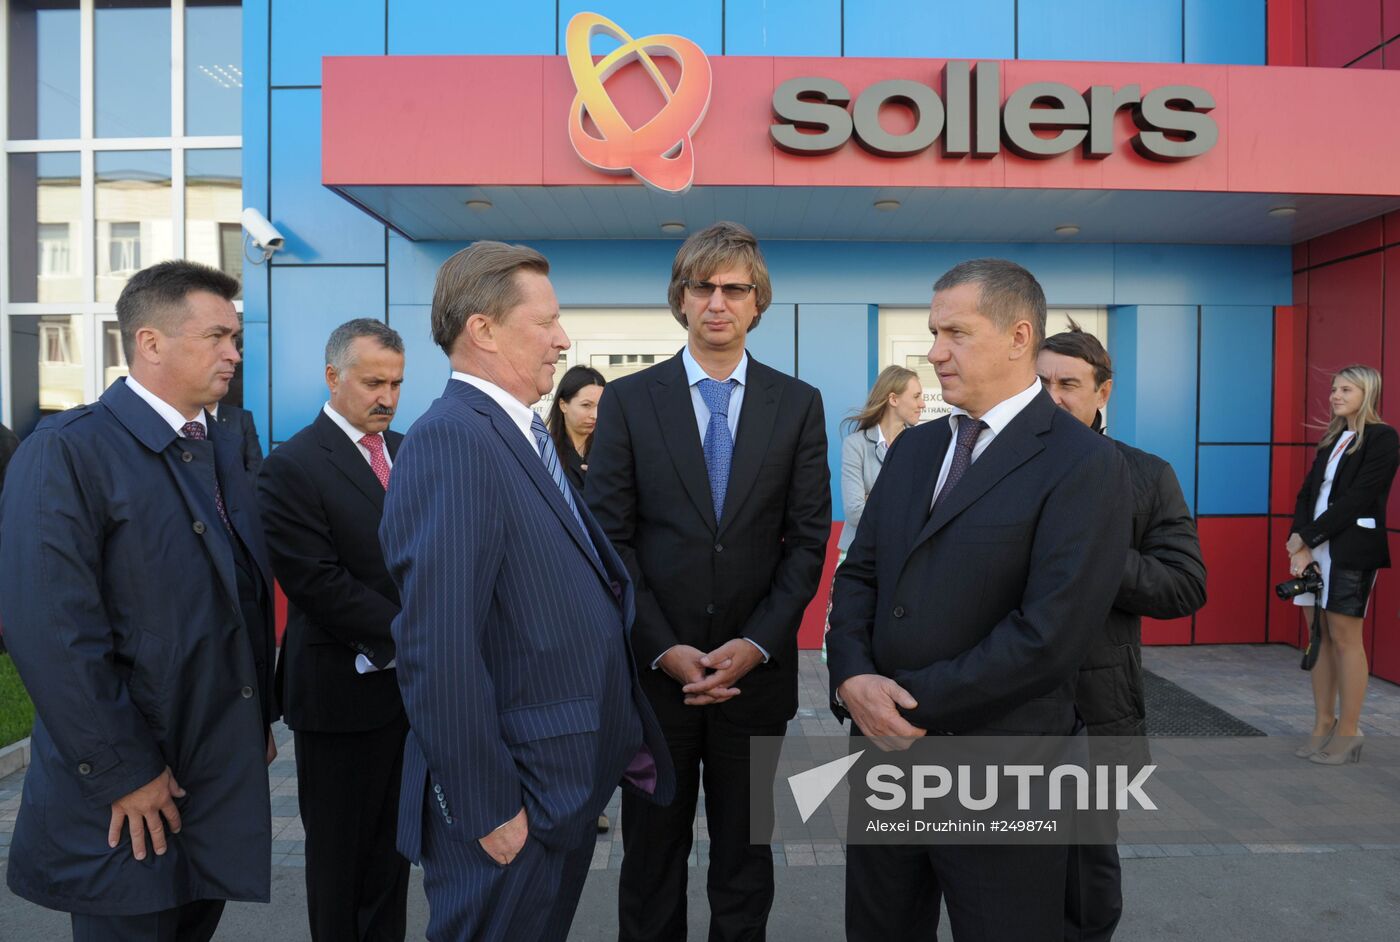 Sergei Ivanov's working visit to the Far East